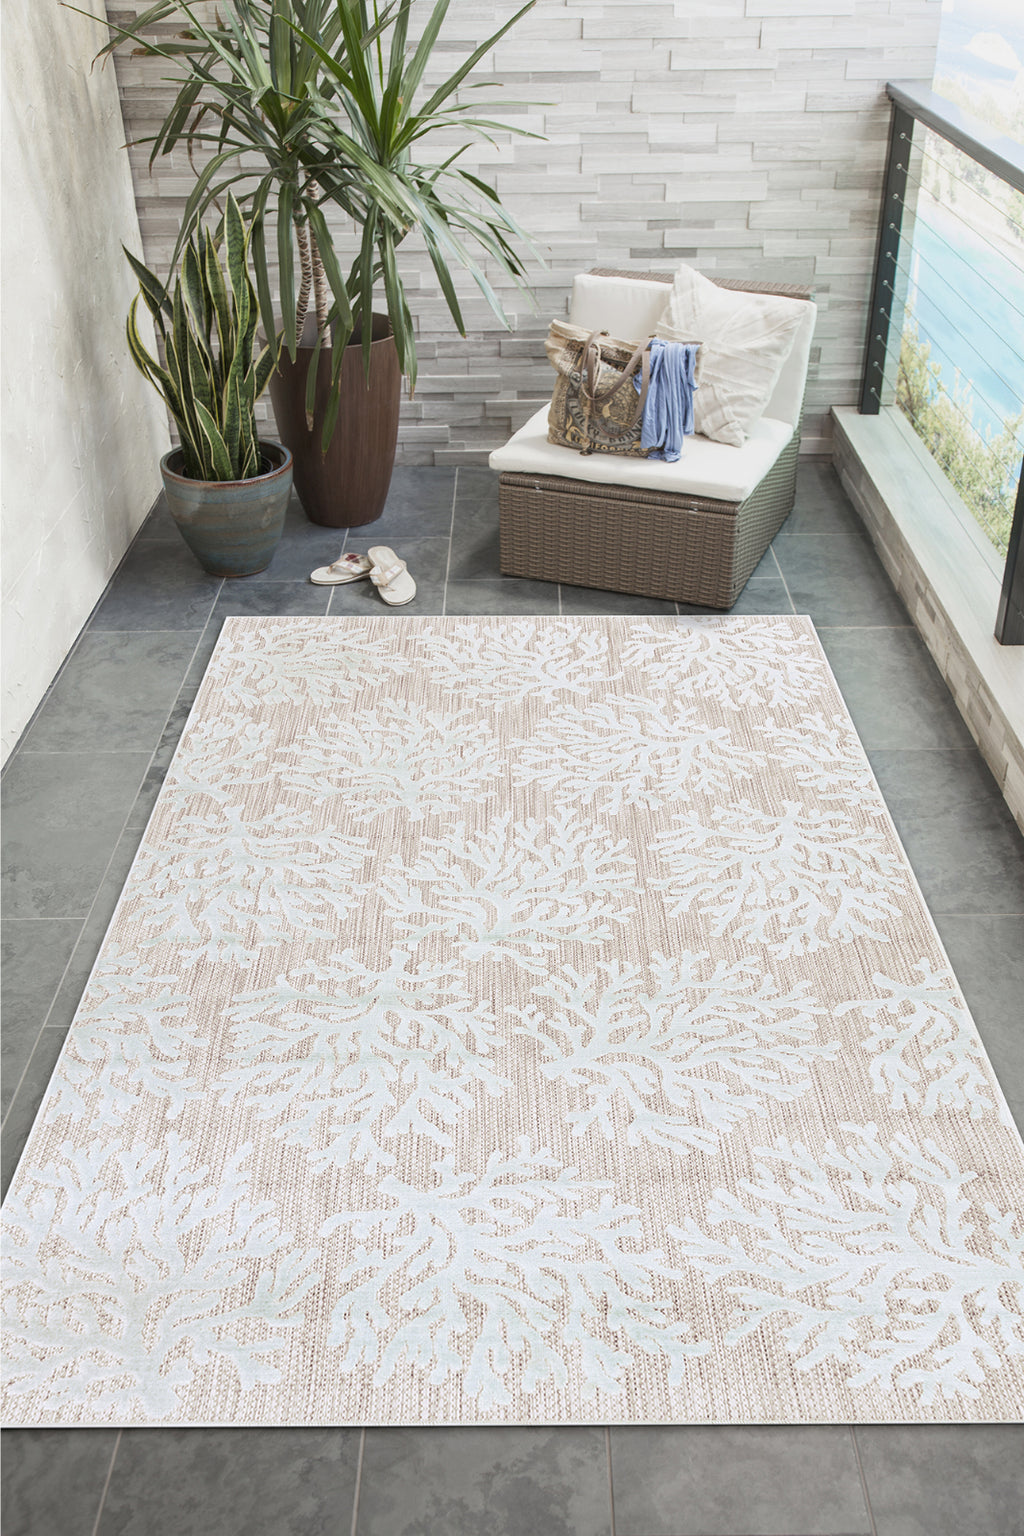 Trans Ocean Rialto 7041/04 Coral Blue Area Rug by Liora Manne Room Scene Image Feature